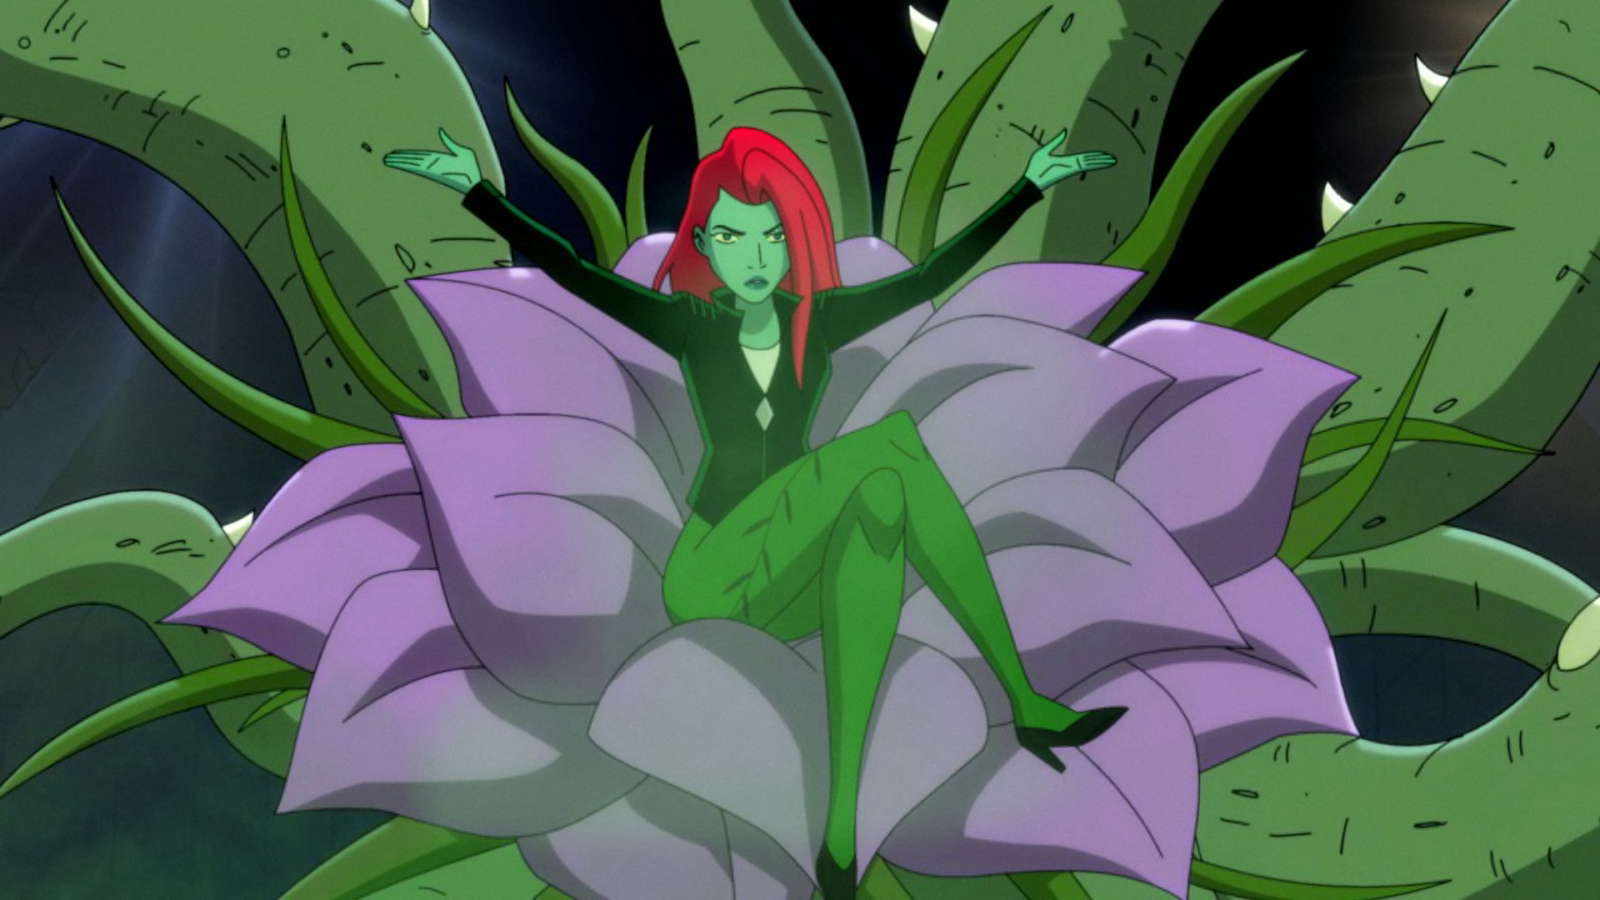 Batman: All 8 Poison Ivy actresses ranked worst to best